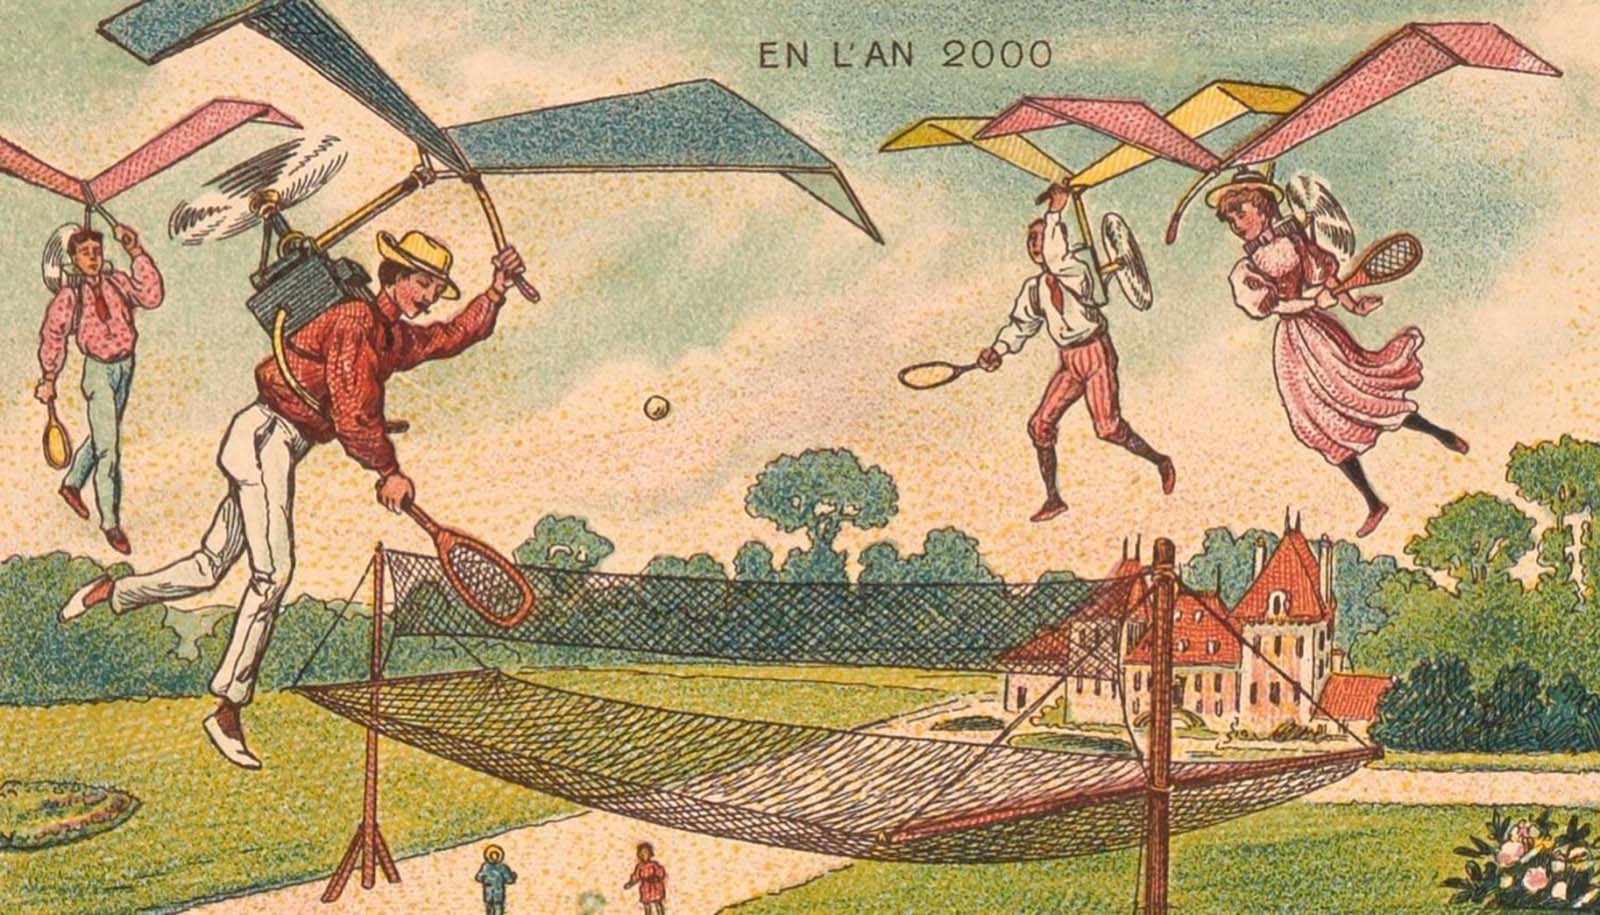 The 19th-century postcards of Jean-Marc Côté that predicted the world in the Year 2000